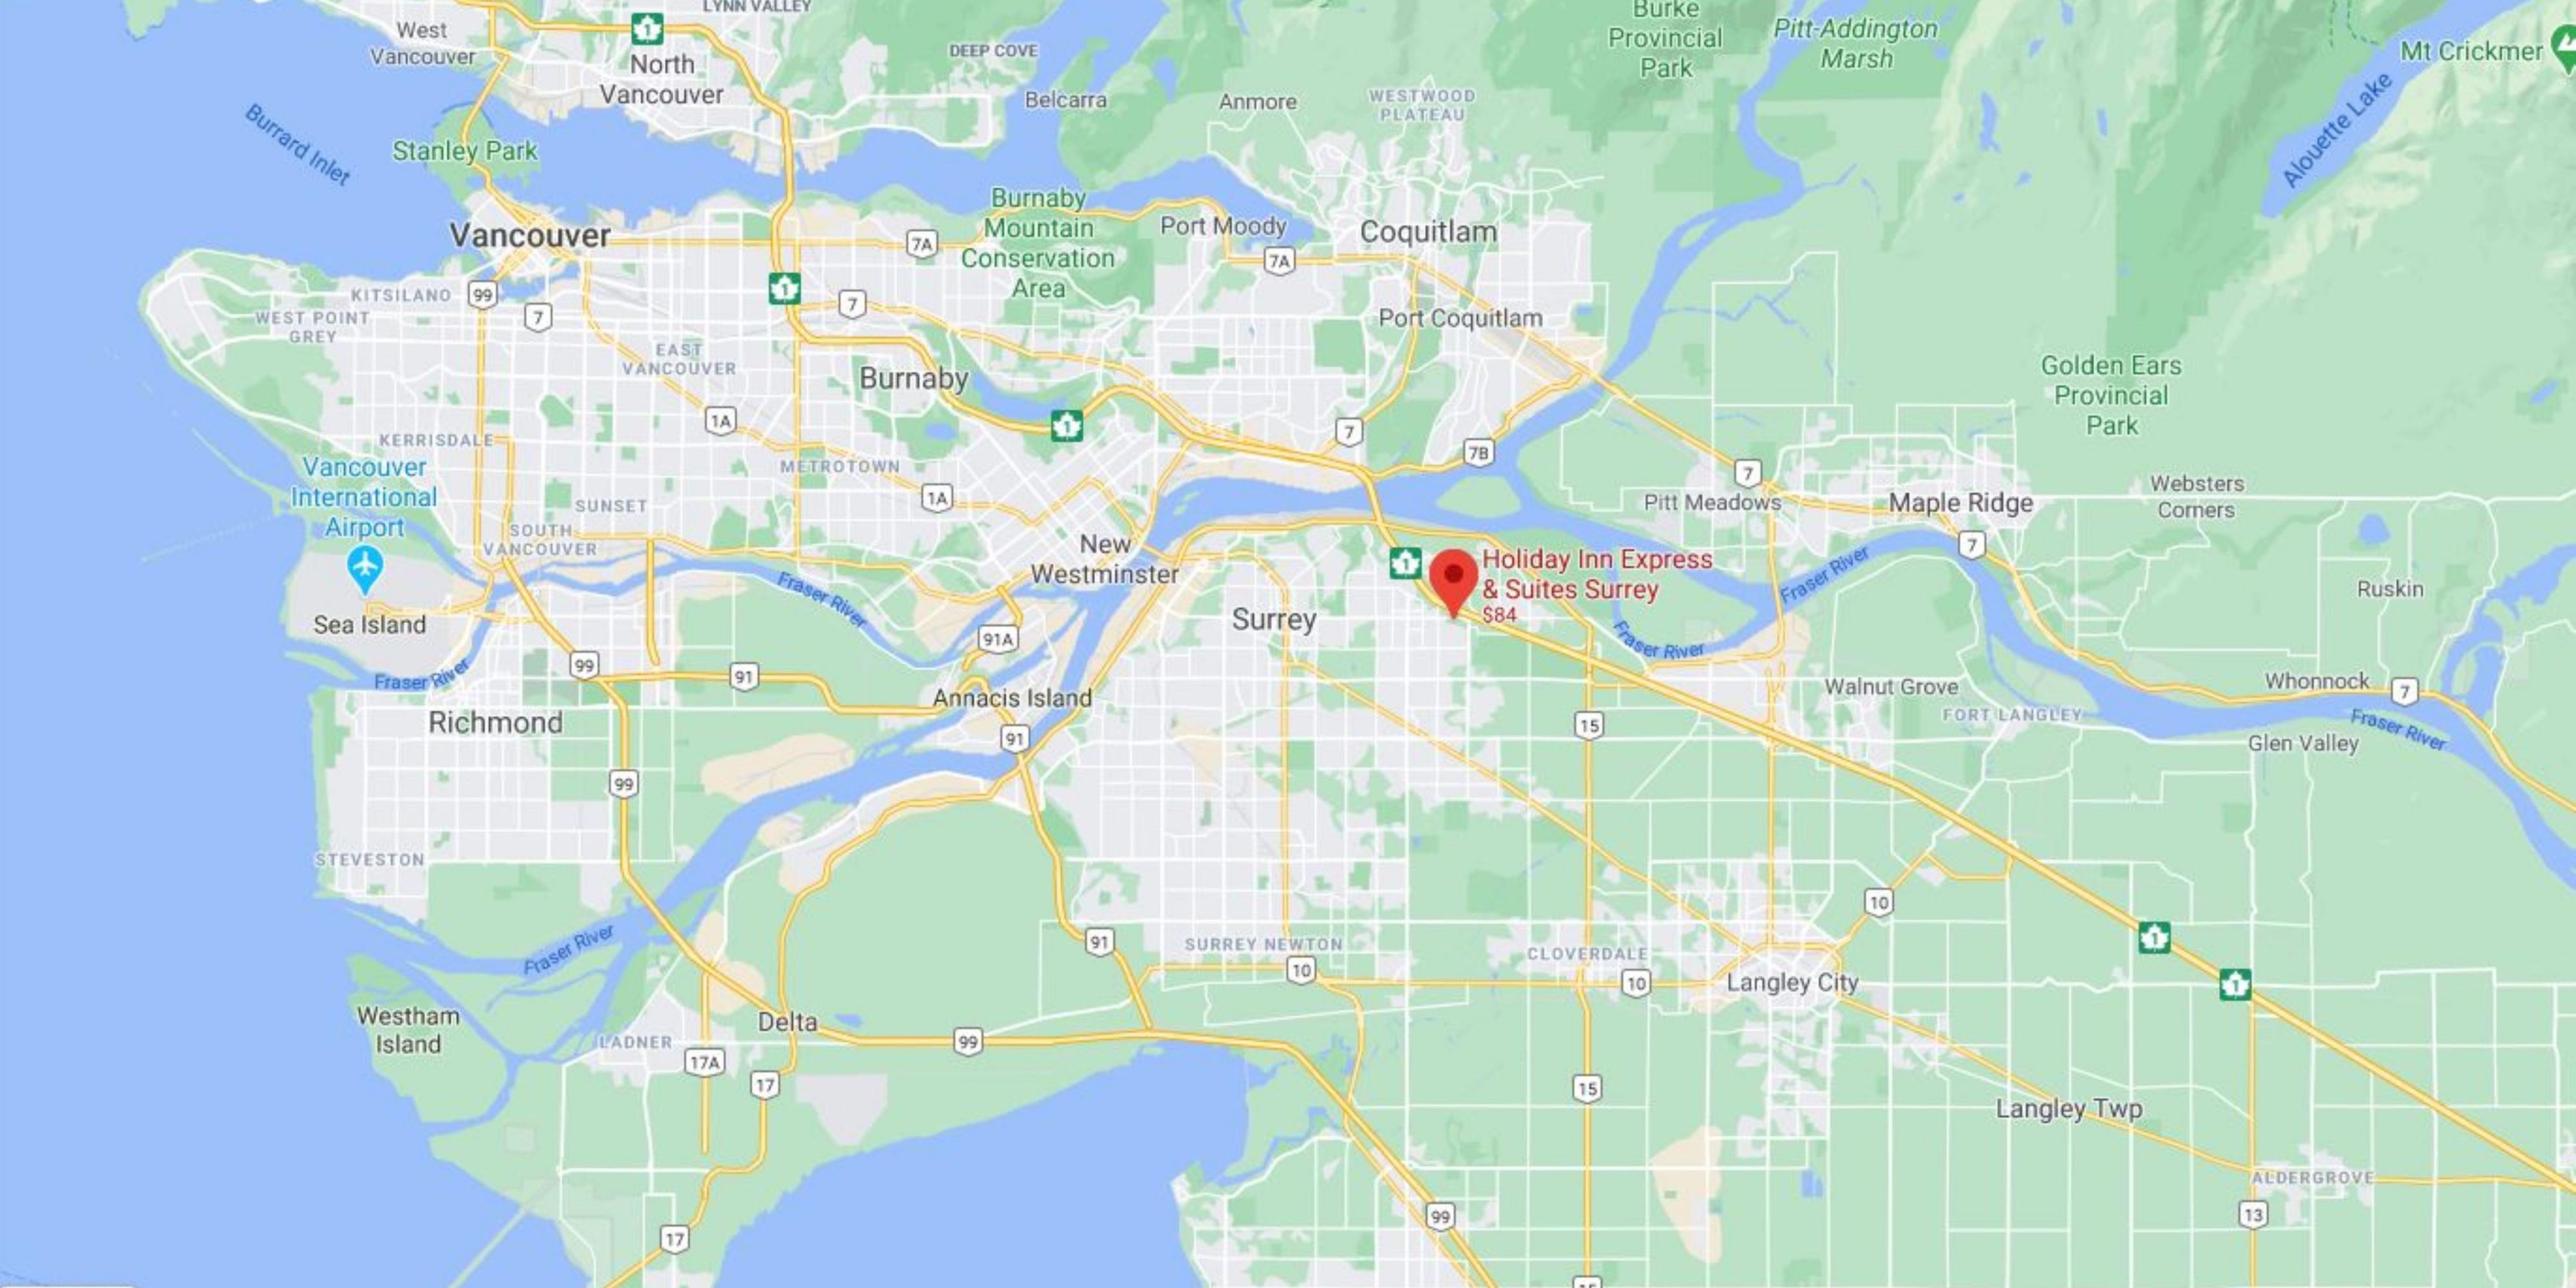 Our property is located at the heart of the lower mainland just off highway one. We are around 30 to 40 minutes from Downtown Vancouver, YVR Airport, Abbotsford Airport, United States border, BC Ferry Terminals, Vancouver Zoo and The Pacific National Exhibition Grounds.